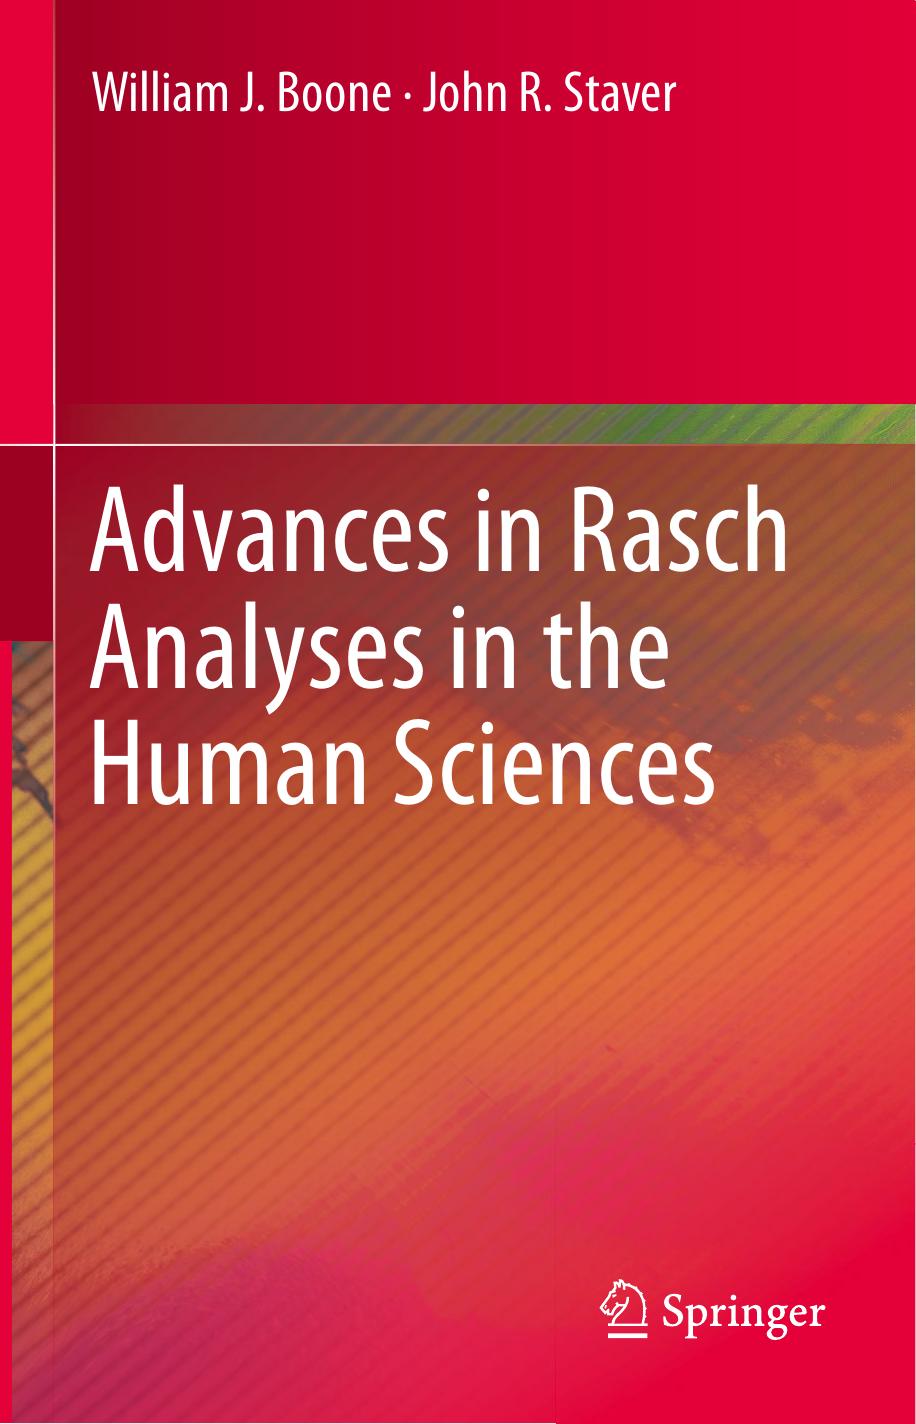 Advances in Rasch Analyses in the Human Sciences by William J. Boone & John R. Staver